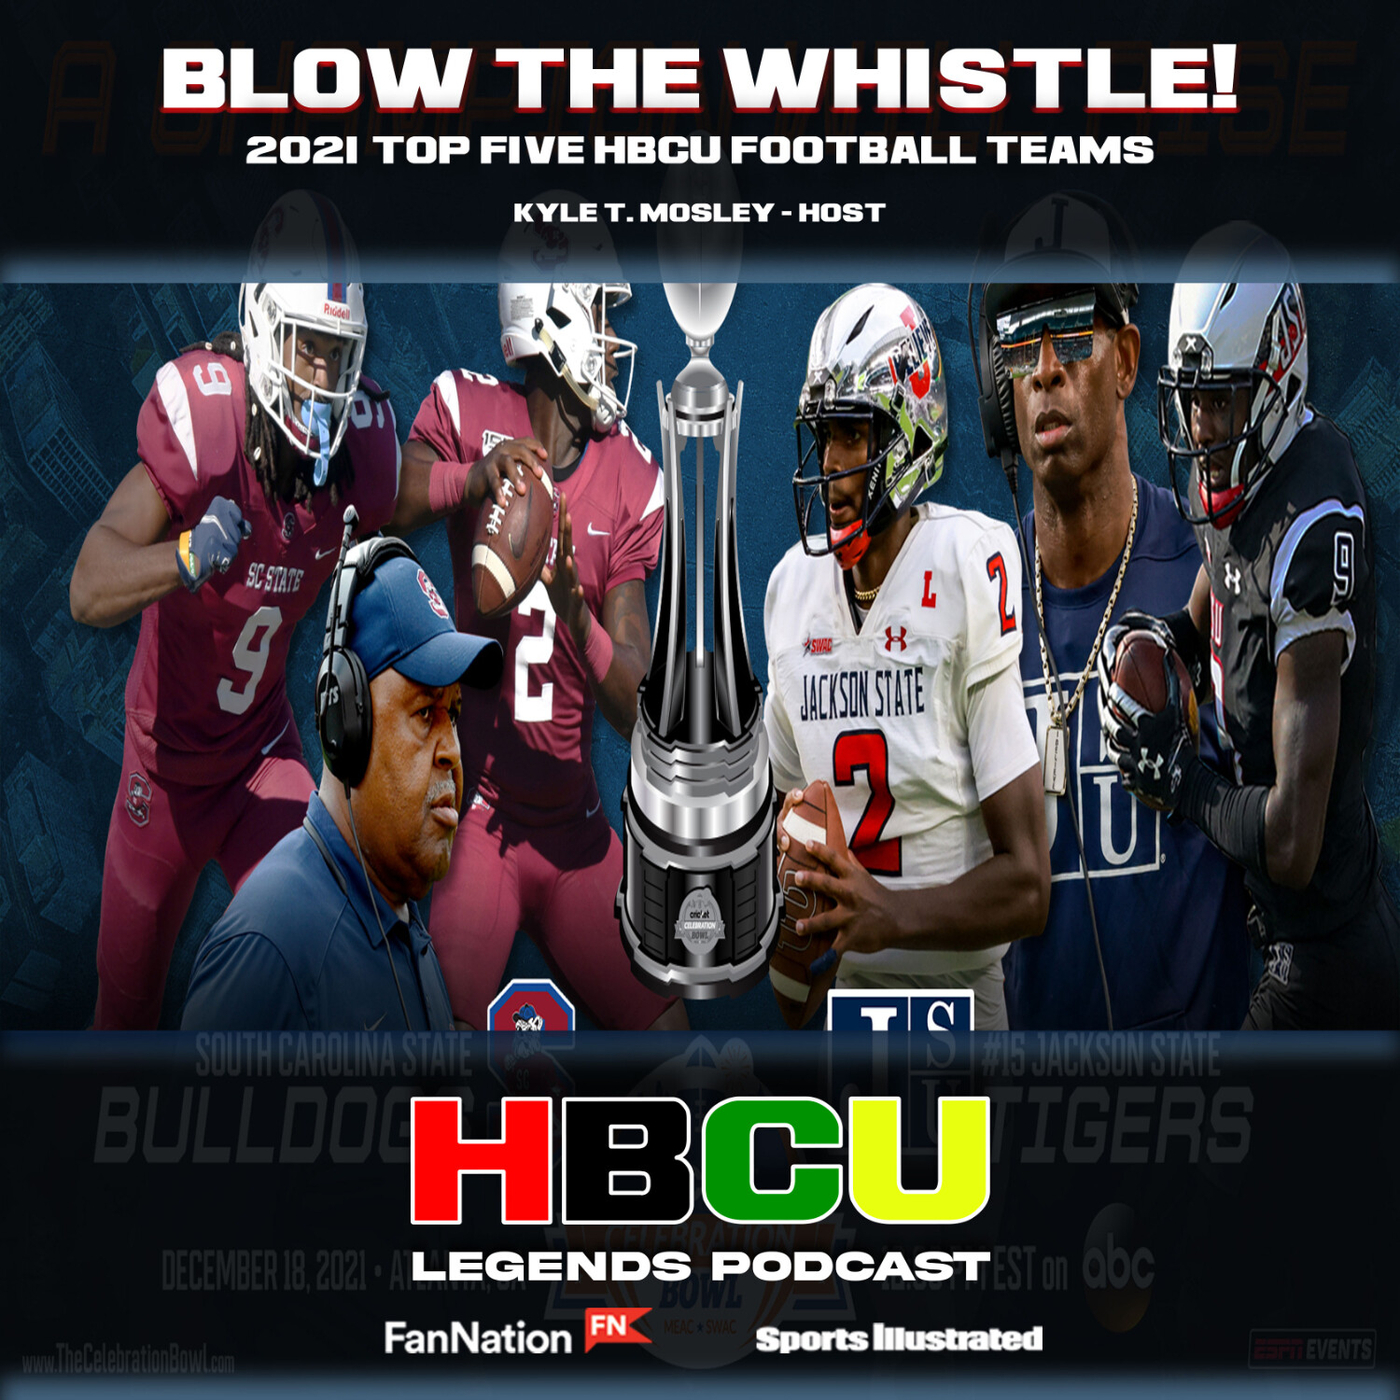 Blow the Whistle Podcast - 2021 Top 5 HBCU Football Teams - HBCU Legends